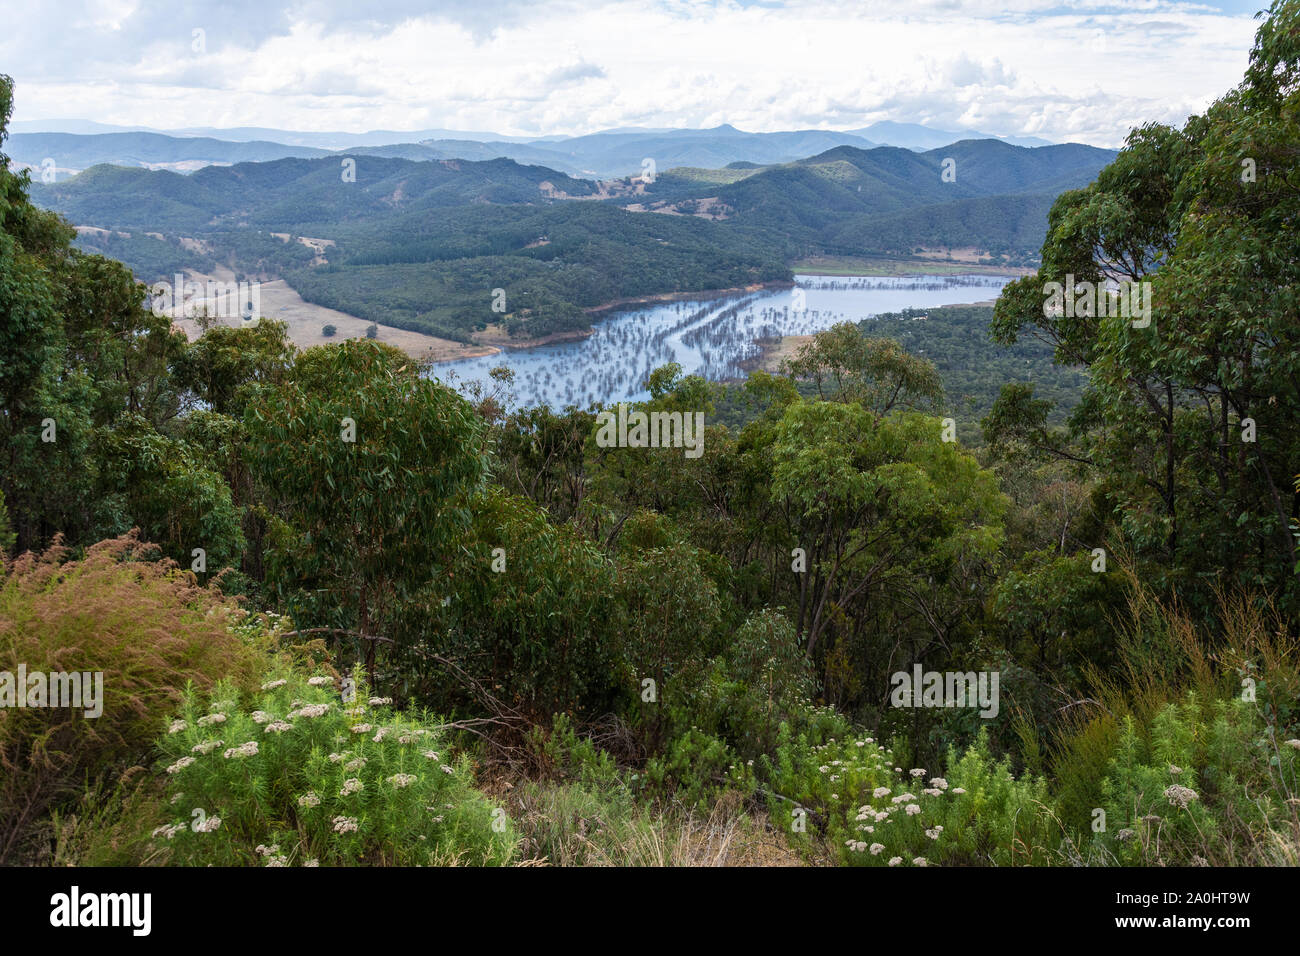 View over Jamieson River in Victoria, Australia. The river rises in Alpine National Park and flows into the Goulburn River at the town of Jamieson. Stock Photo